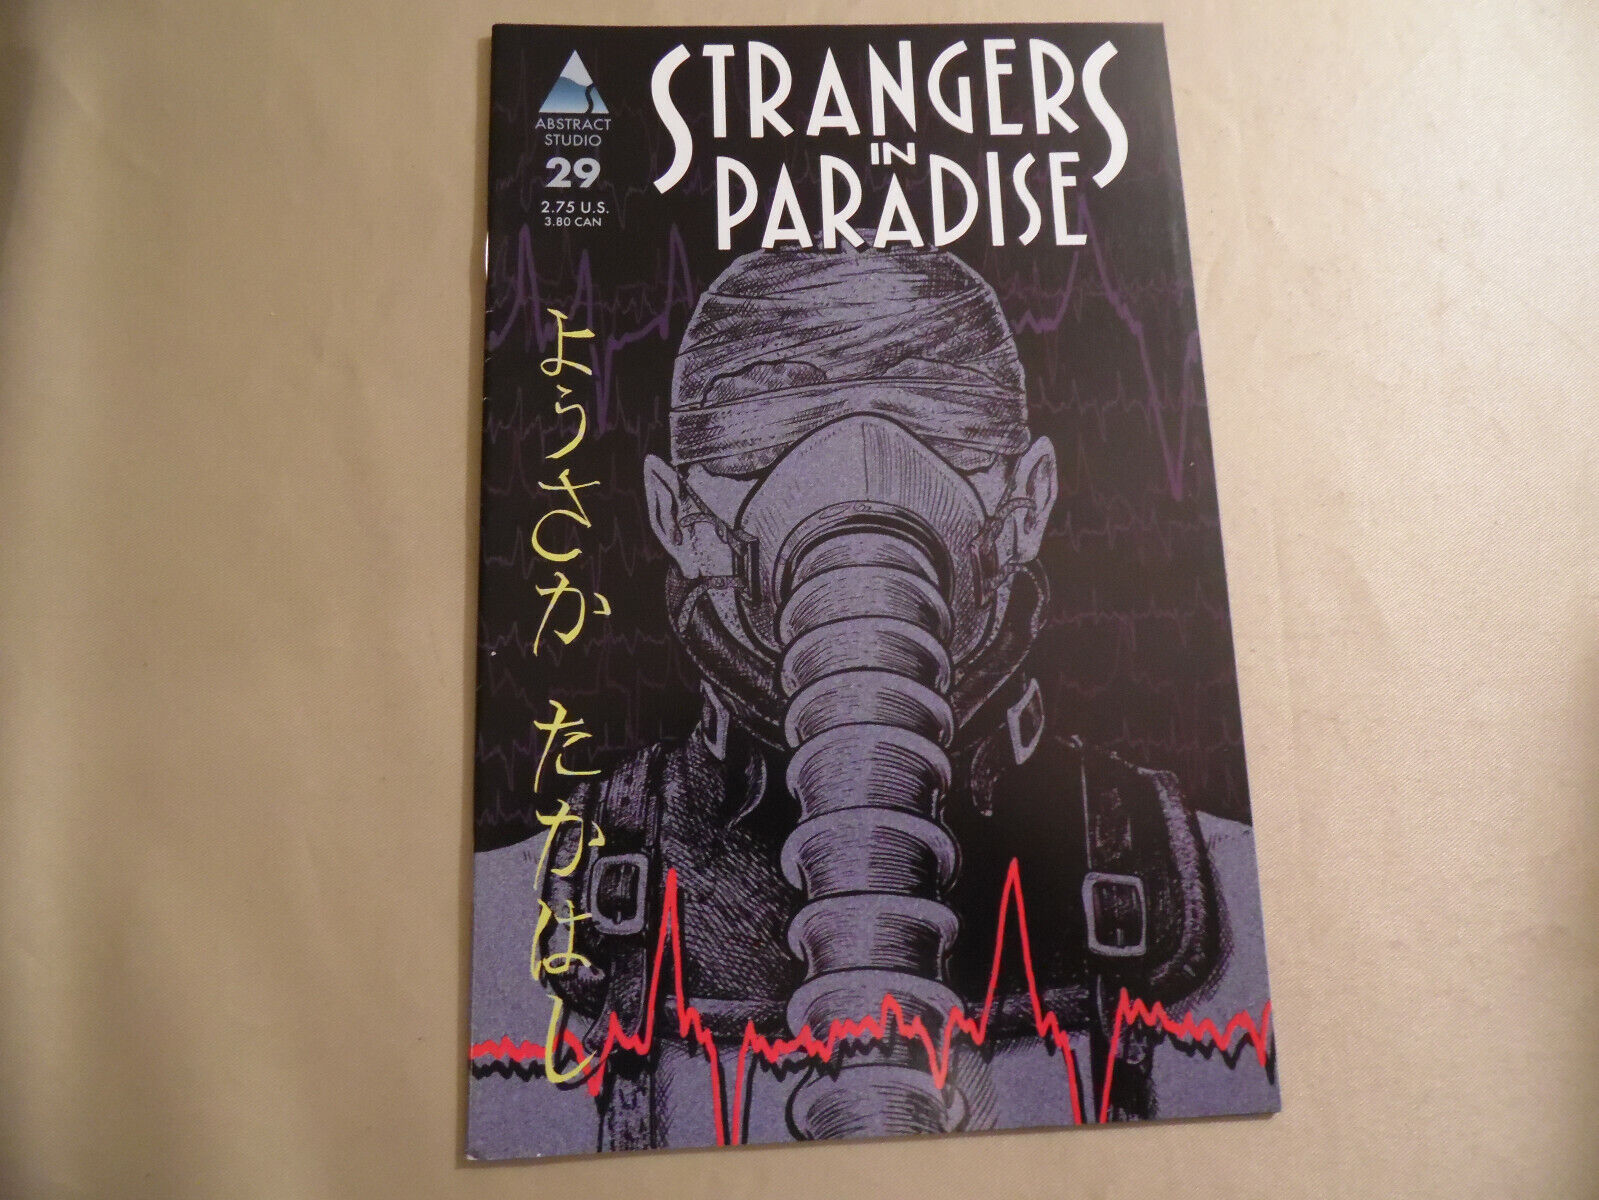 Strangers in Paradise #29 (Abstract Studio 1999) Free Domestic Shipping